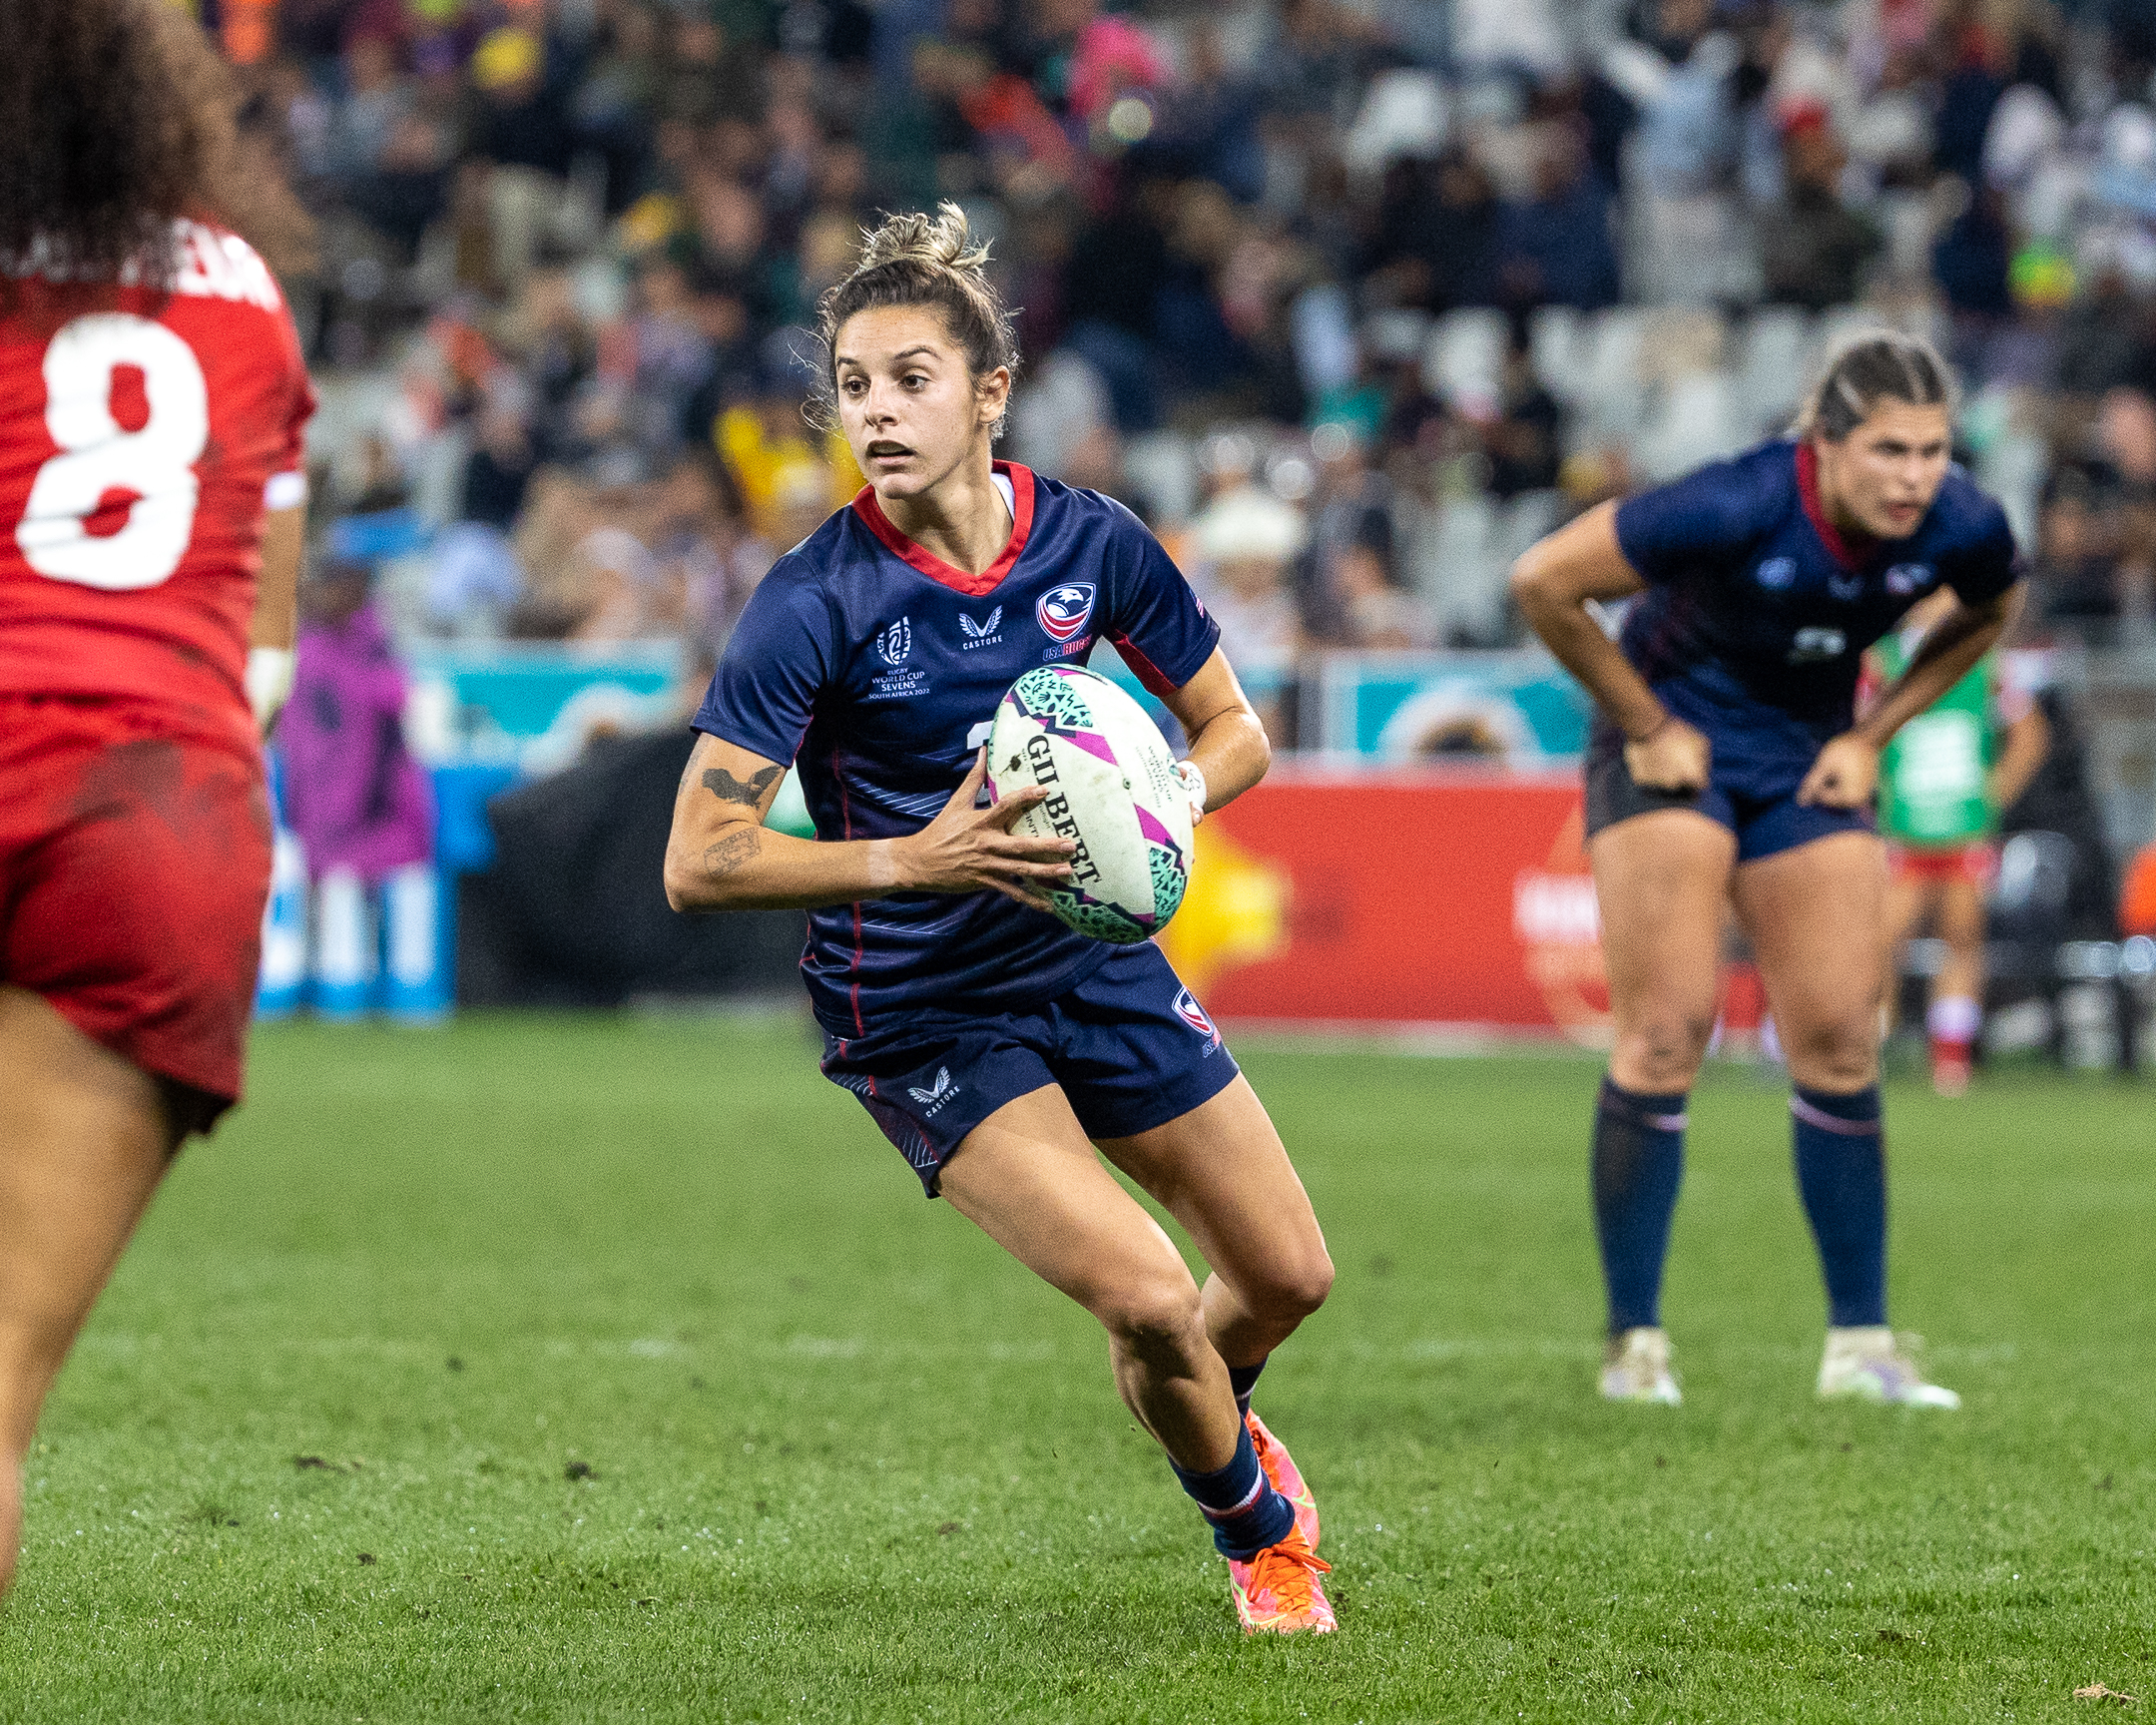 Kayla Canett from Rugby World Cup 7s